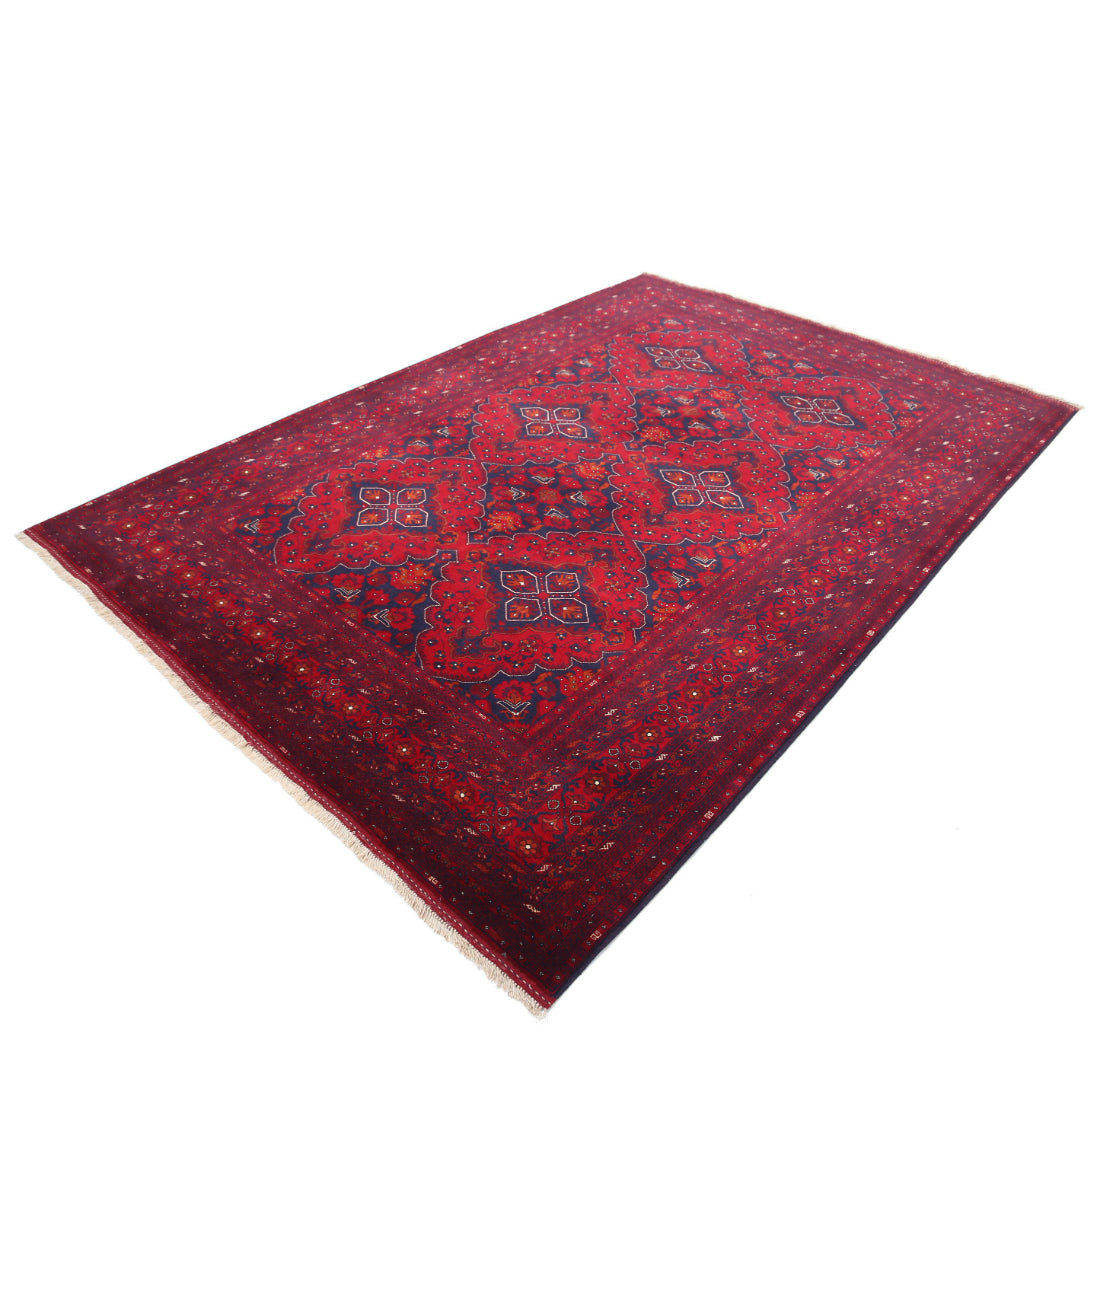 Hand Knotted Afghan Beljik Wool Rug - 6'8'' x 9'8'' 6'8'' x 9'8'' (200 X 290) / Red / Red